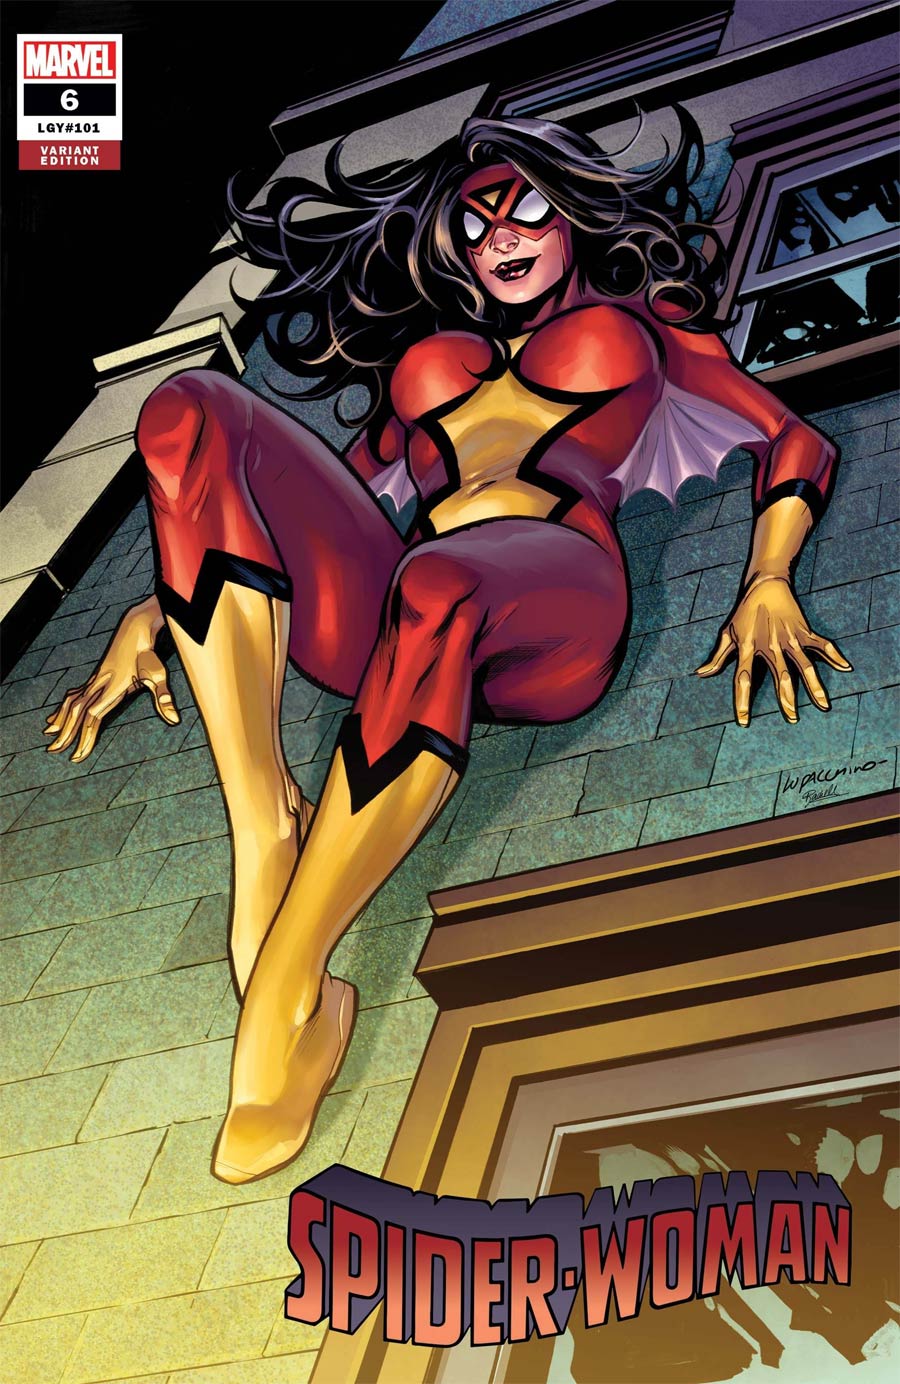 Spider-Woman Vol 7 #6 Cover B Variant Emanuela Lupacchino Cover